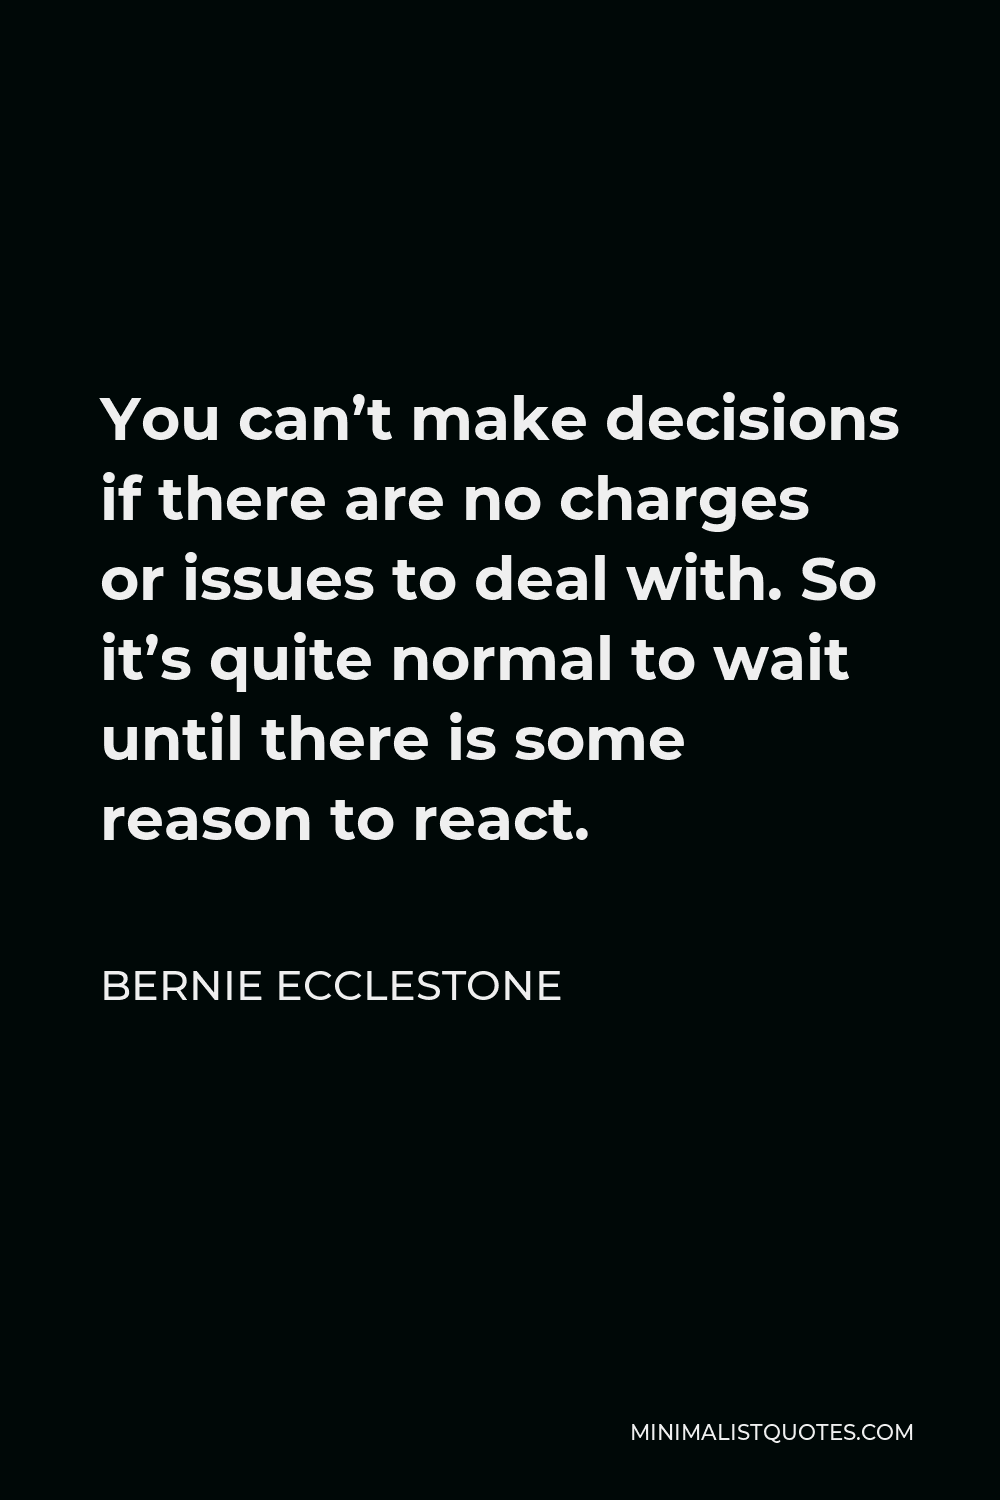 Bernie Ecclestone Quote - You can’t make decisions if there are no charges or issues to deal with. So it’s quite normal to wait until there is some reason to react.